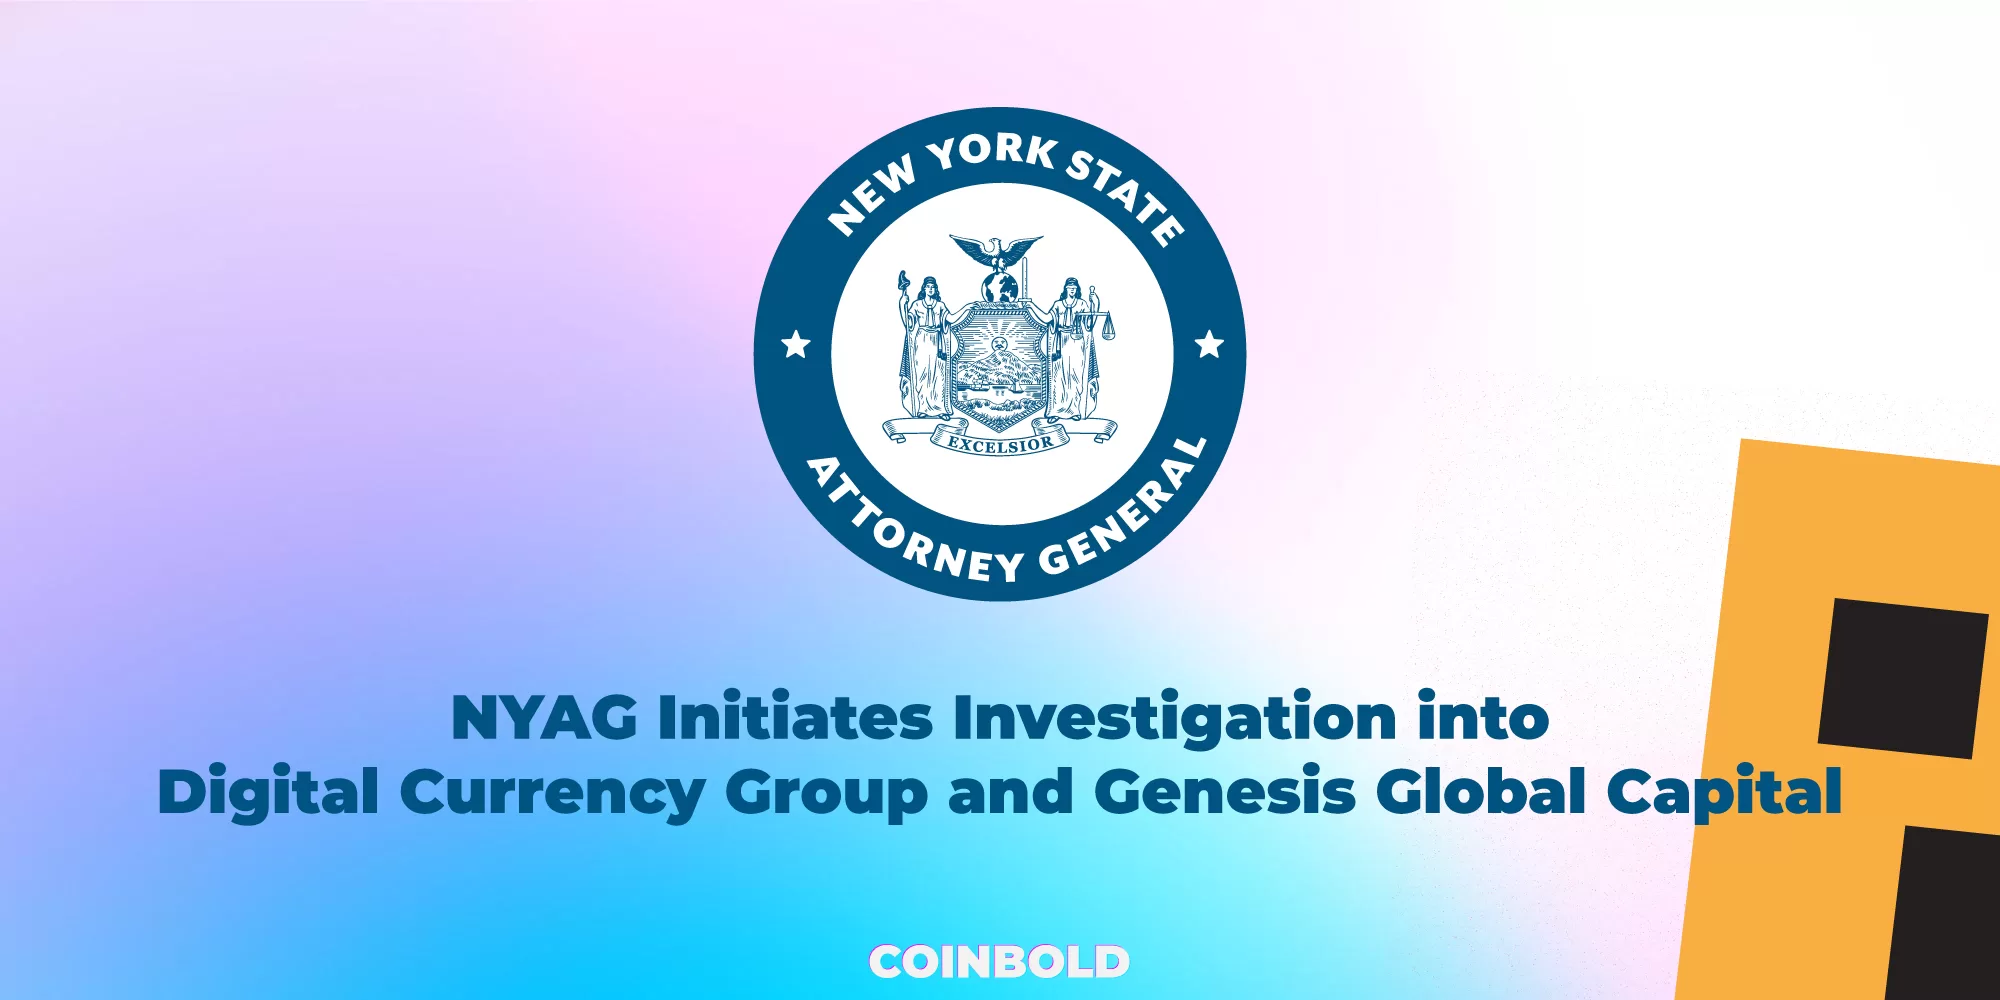 NYAG Initiates Investigation into Digital Currency Group and Genesis Global Capital